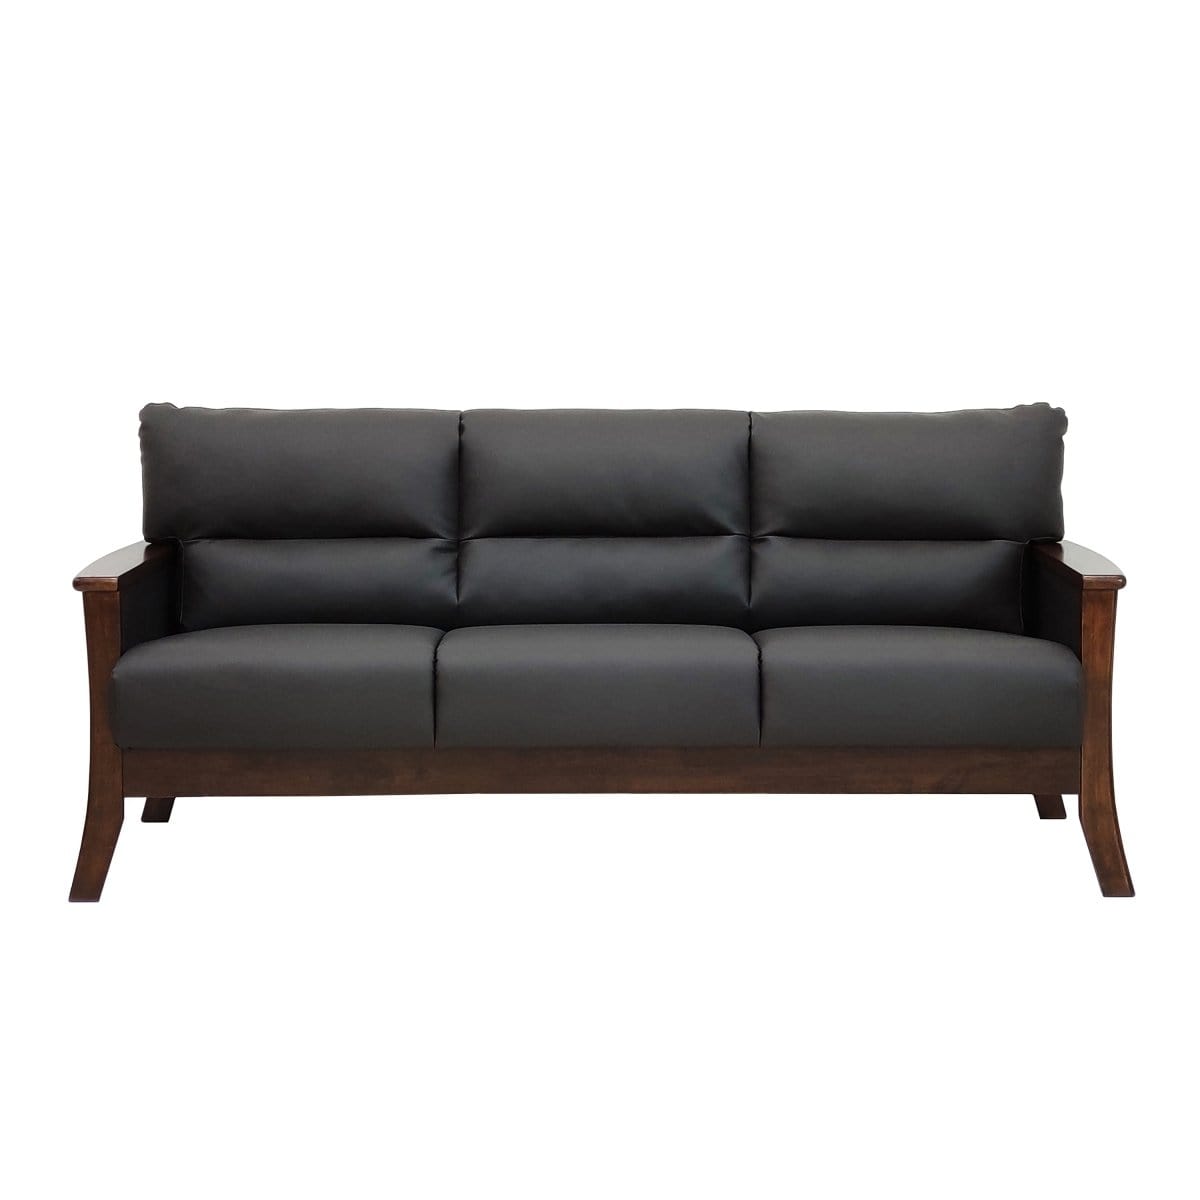 Davis 3-Seater Solid Wood Frame Leather-Upholstered Sofa picket and rail